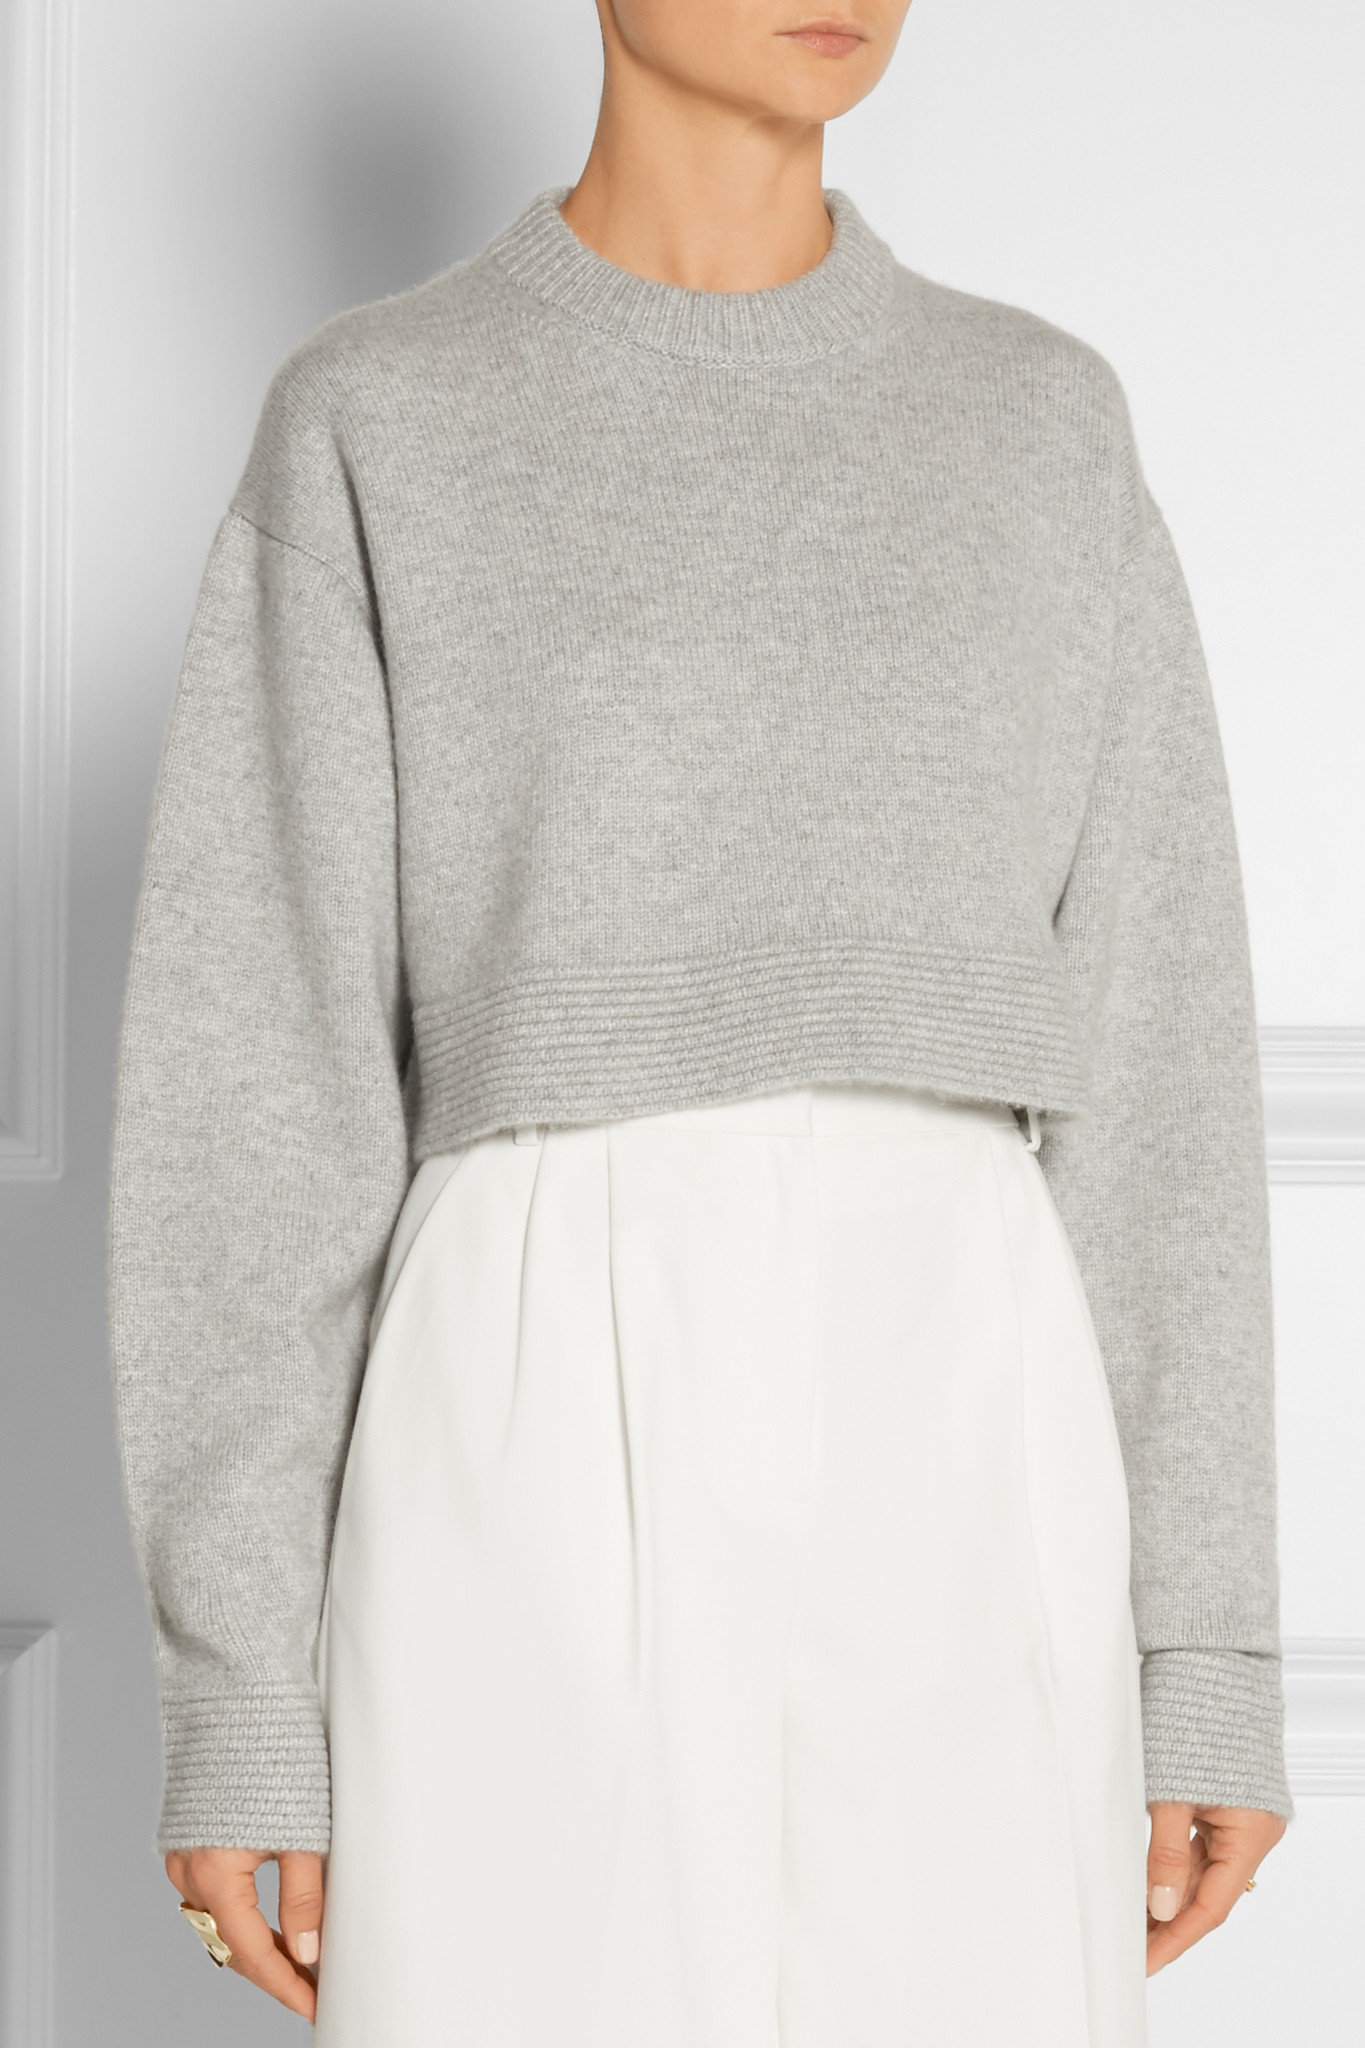 Tibi Cropped Cashmere Sweater in Gray | Lyst